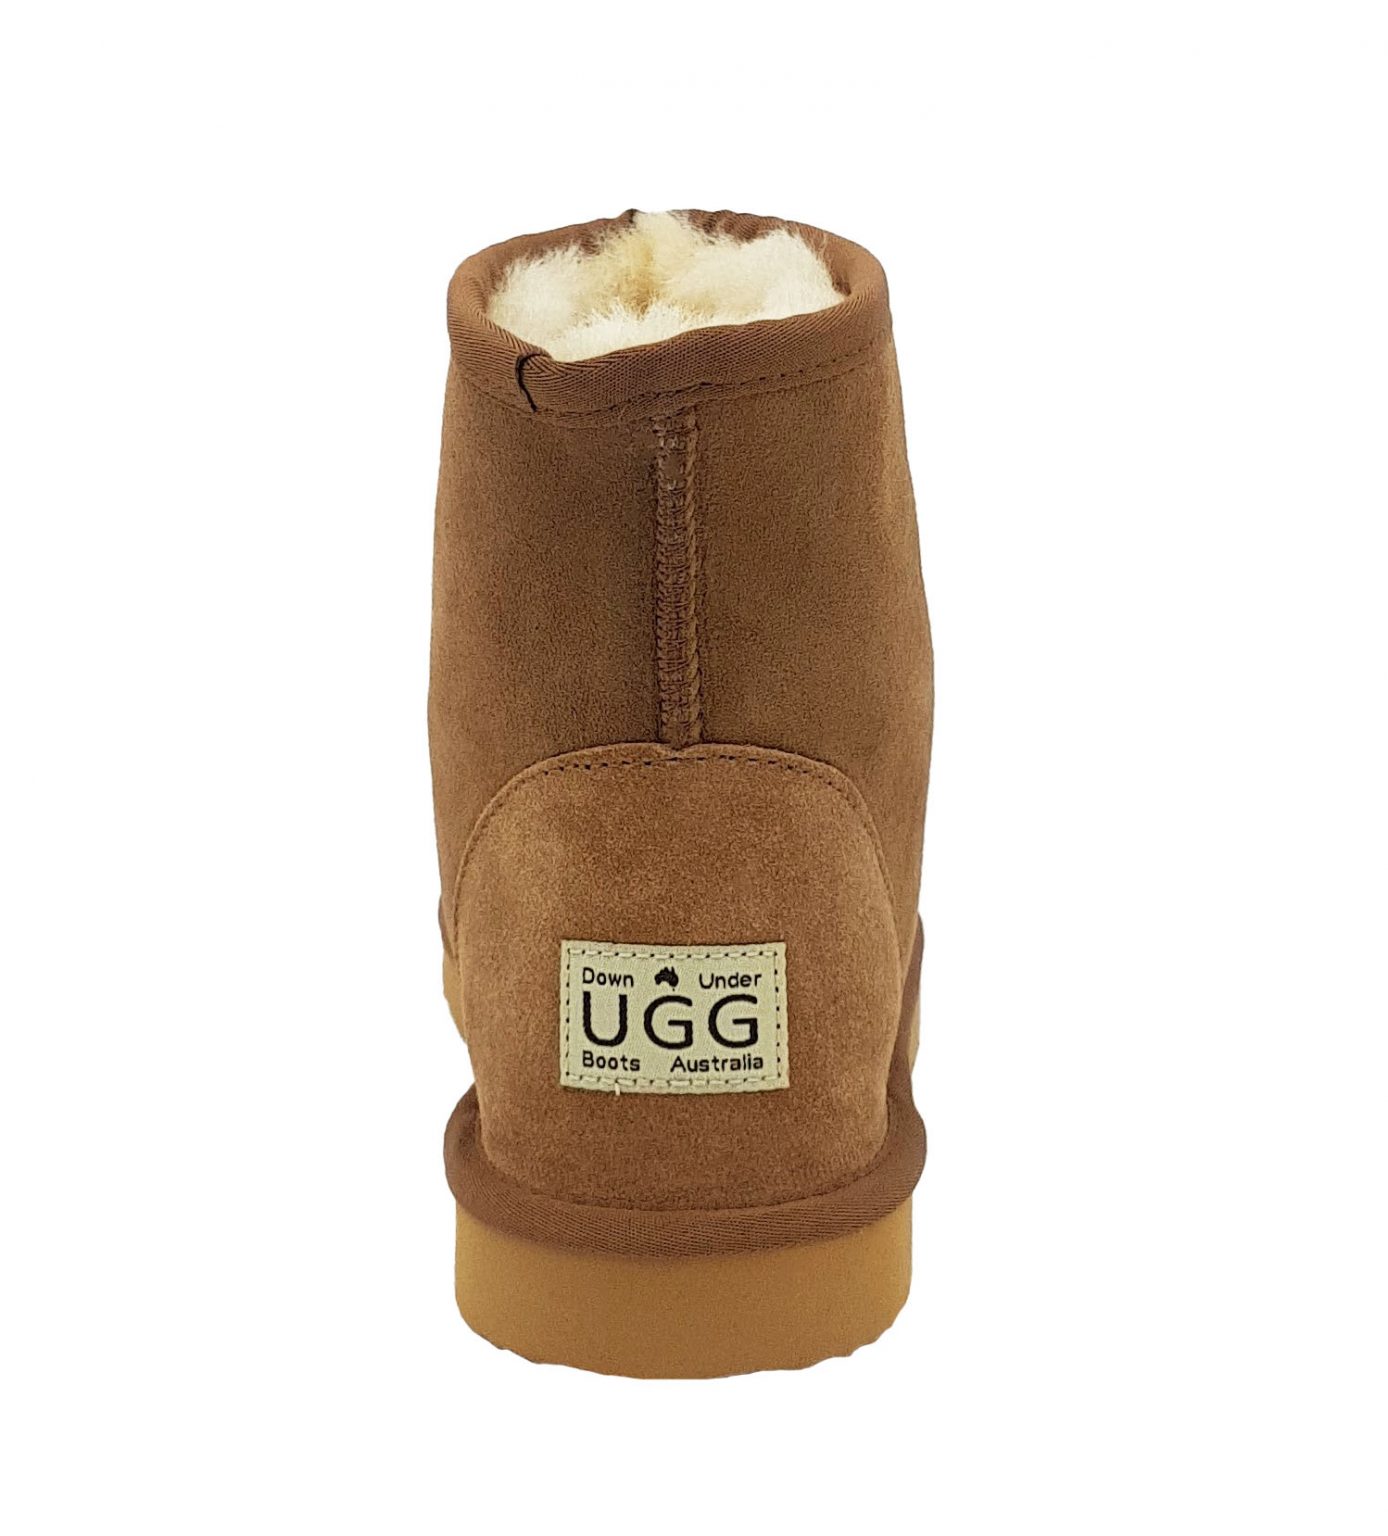 Rolly Top Ugg Boots - Downunder Ugg Boots